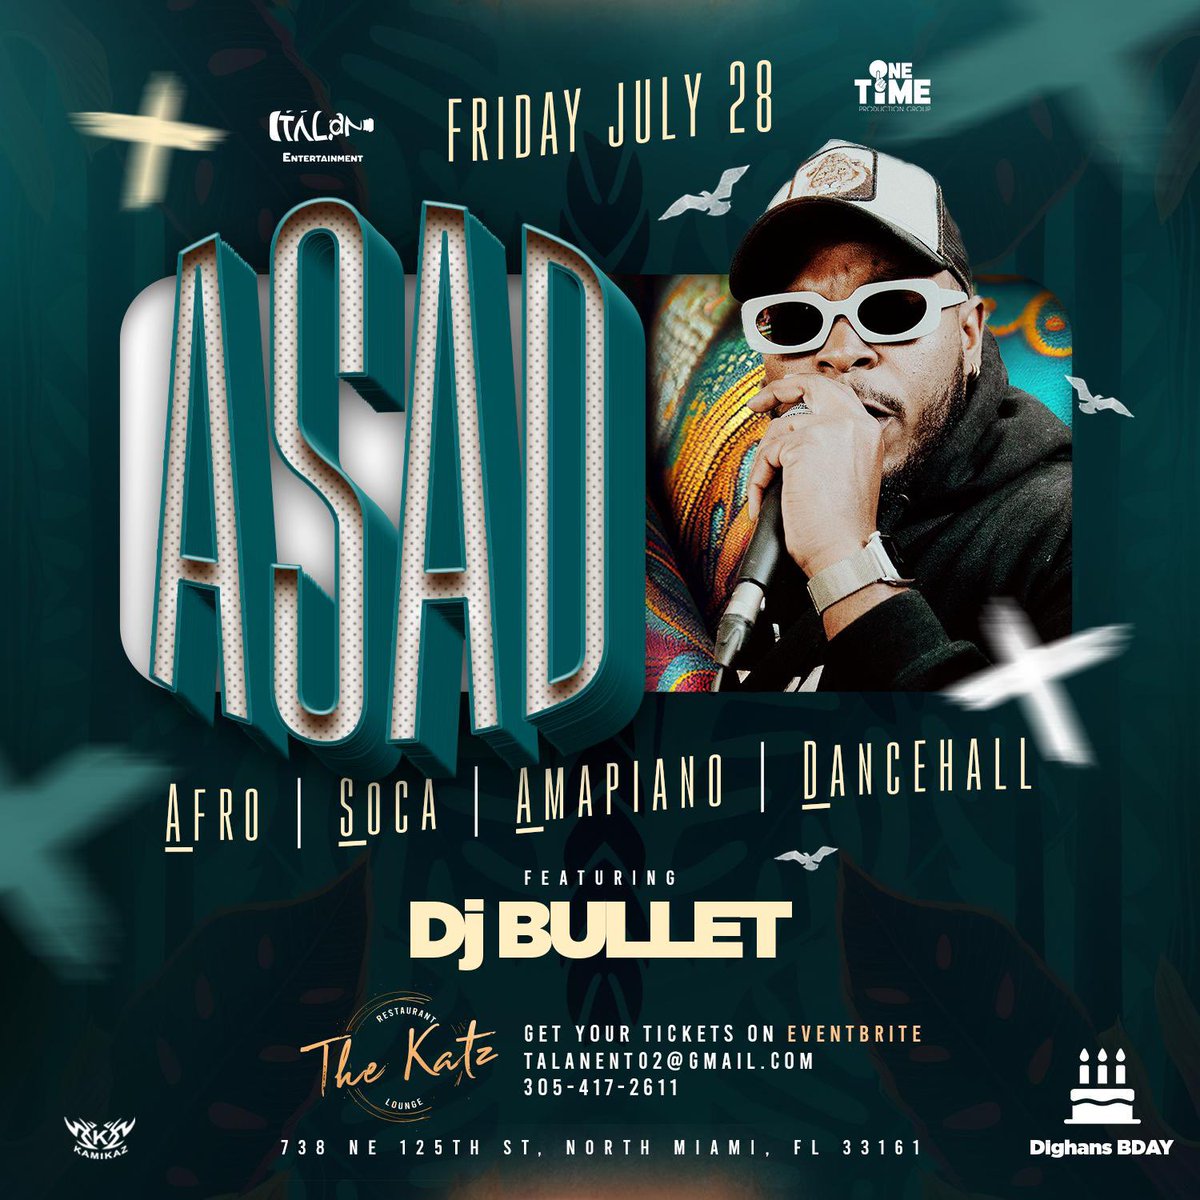 ASAD Miami  welcome DJ Bullet, the phenomenal open format DJ straight from Haiti. From soca to dancehall, Afro beats to amapiano, he'll transport you to the heart of the Caribbean with his unmatched talent and infectious beats. #ourenmensa #talanent #miamievent #djbullet